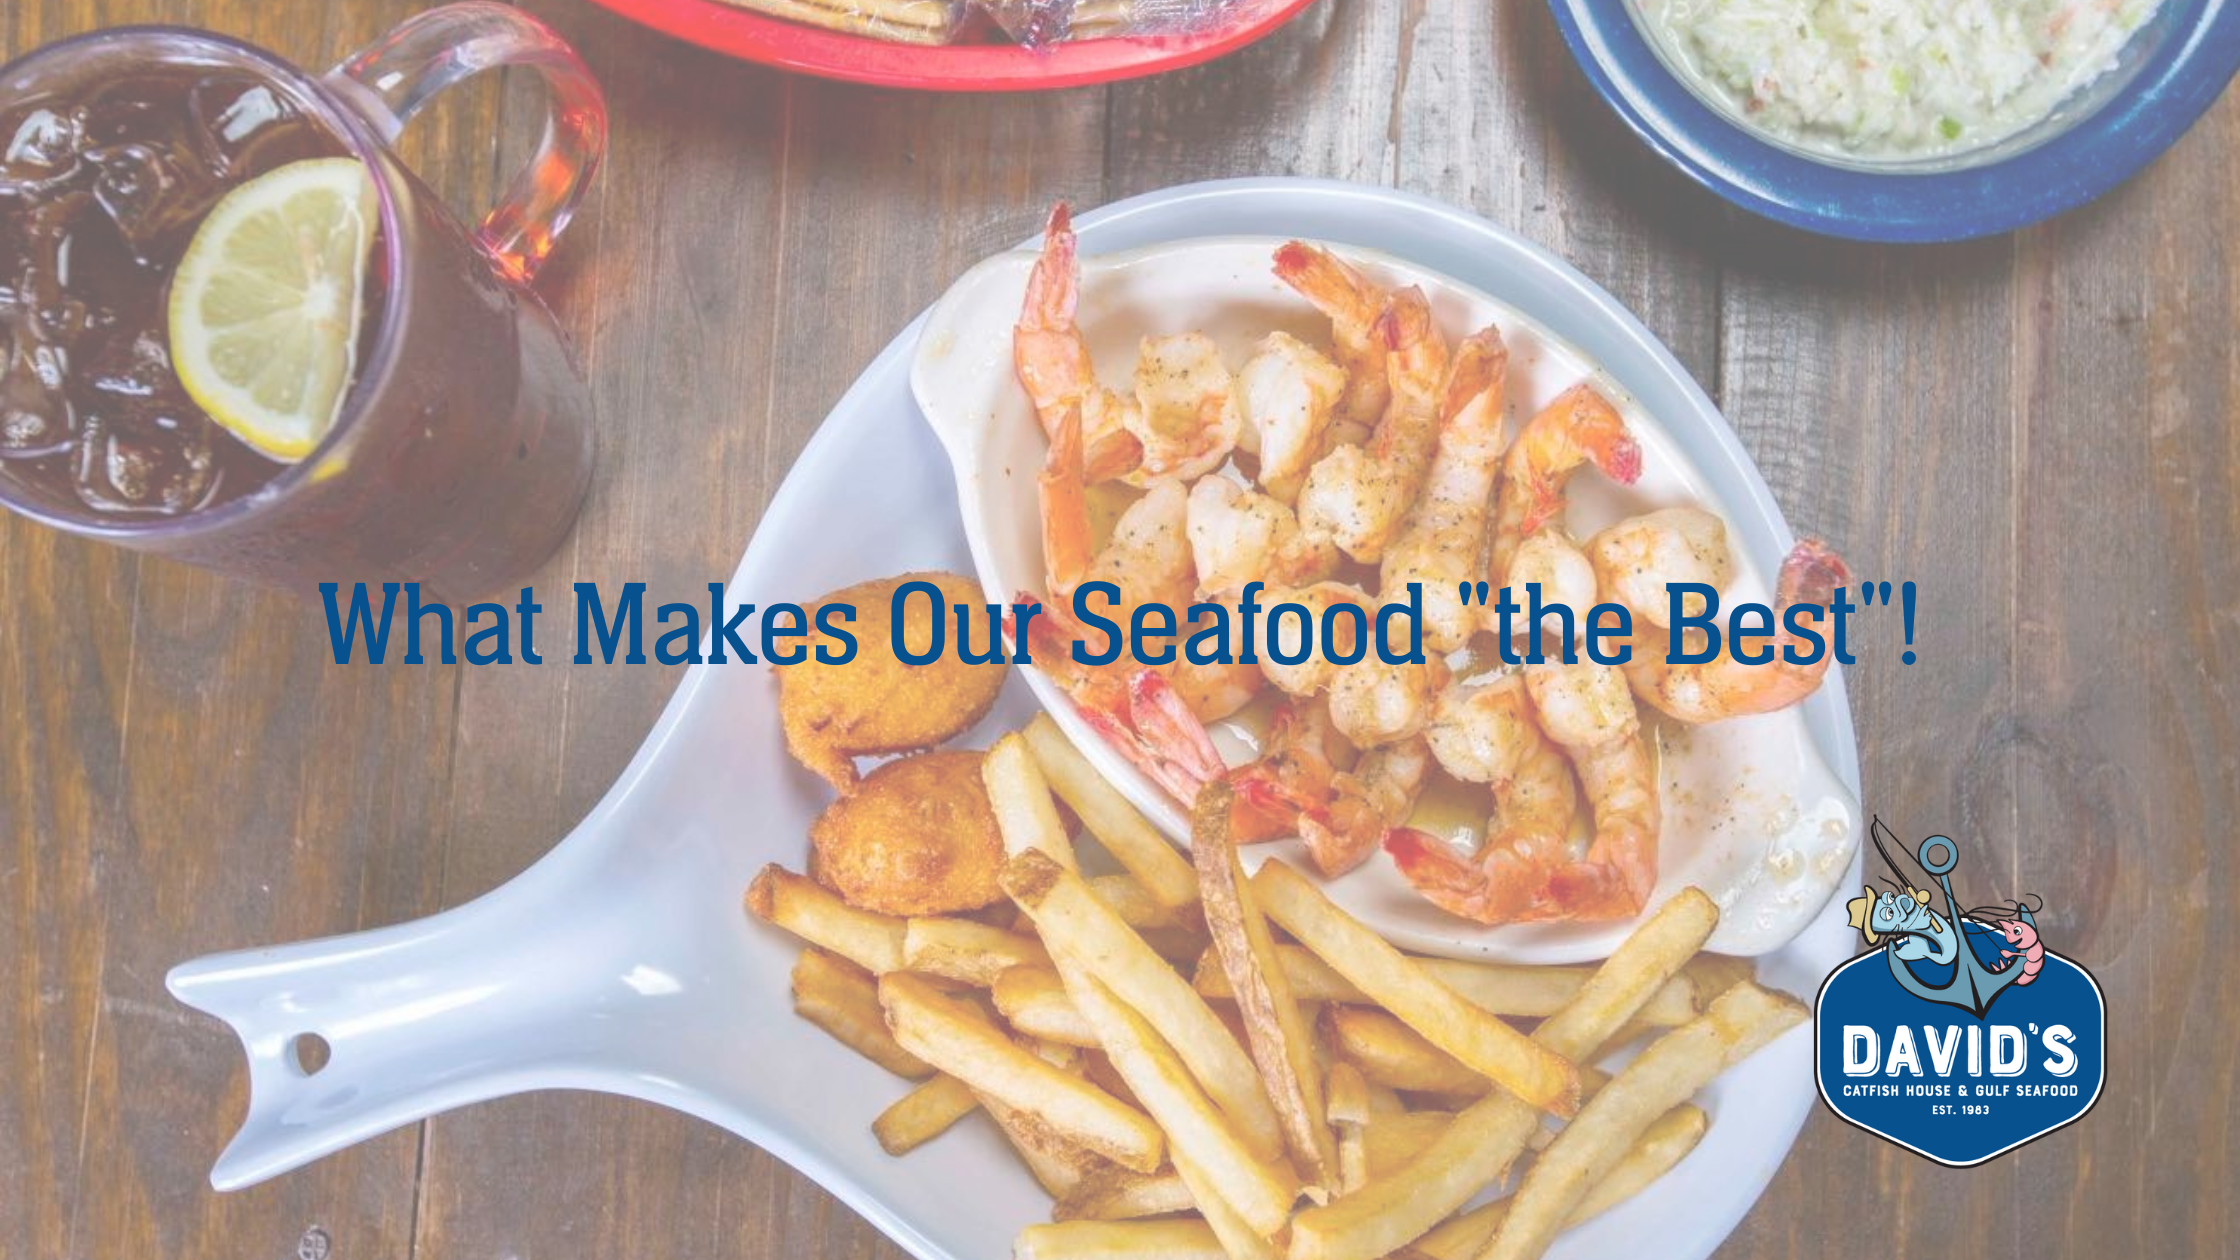 What Makes Our Seafood "The Best"?